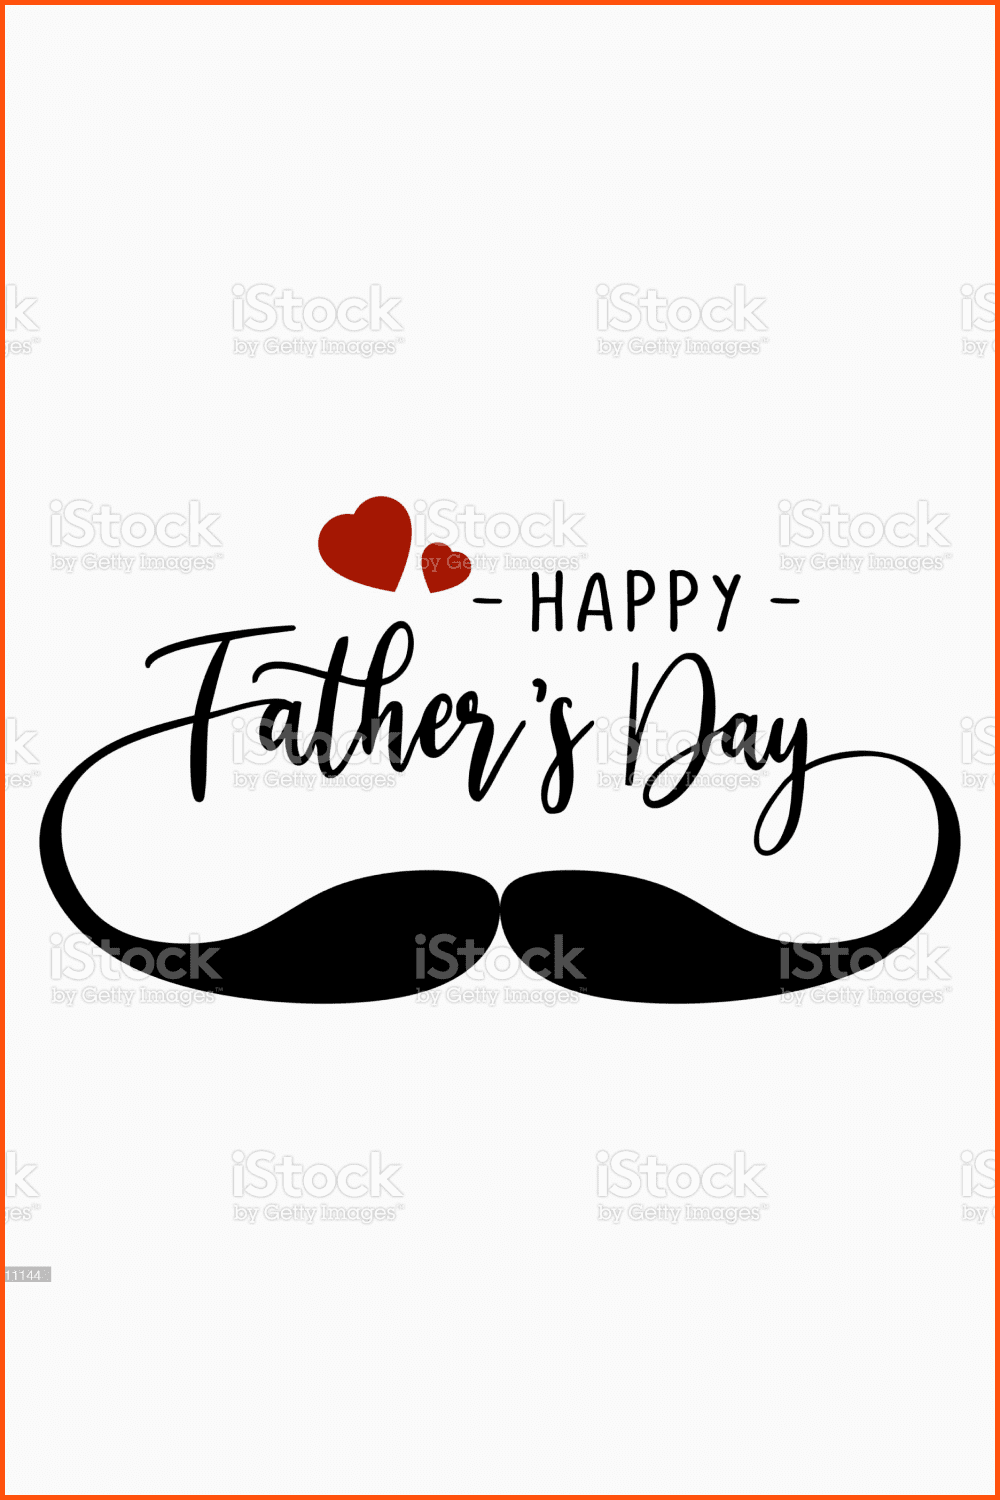 Happy Fathers Day Vector Illustration.